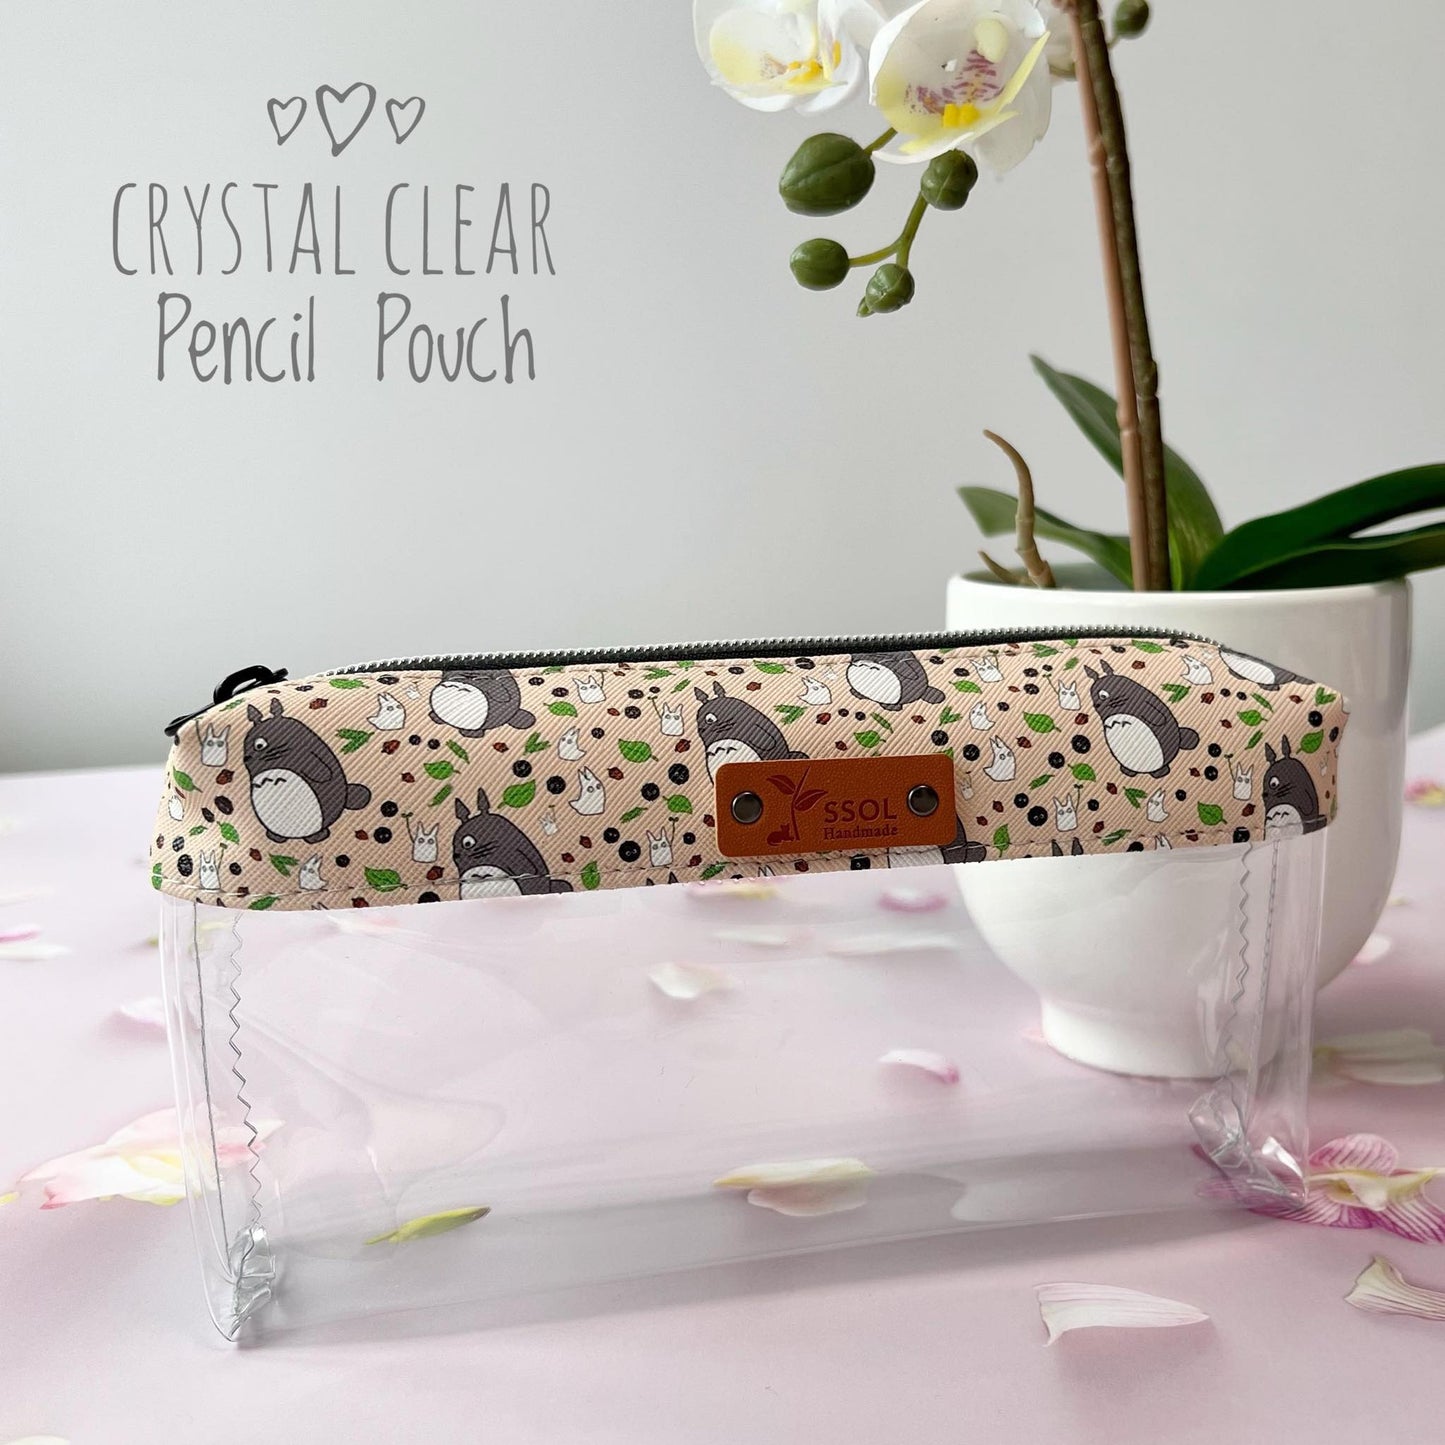 Crystal Clear Pencil Pouch - CCPP02